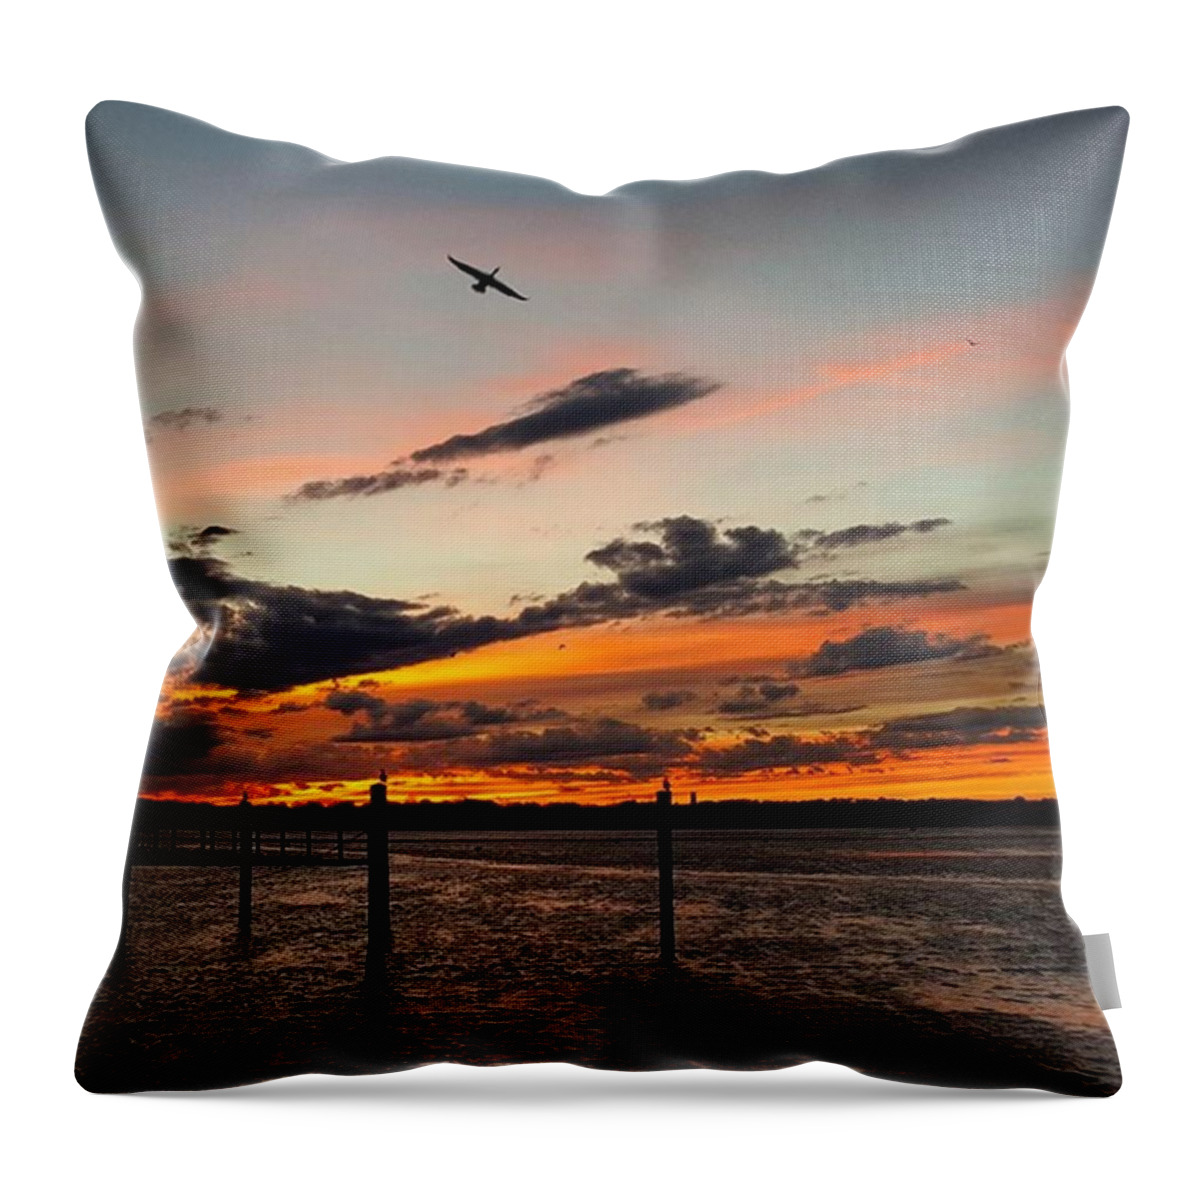 Sky Throw Pillow featuring the photograph Soarin' by Lauren Fitzpatrick